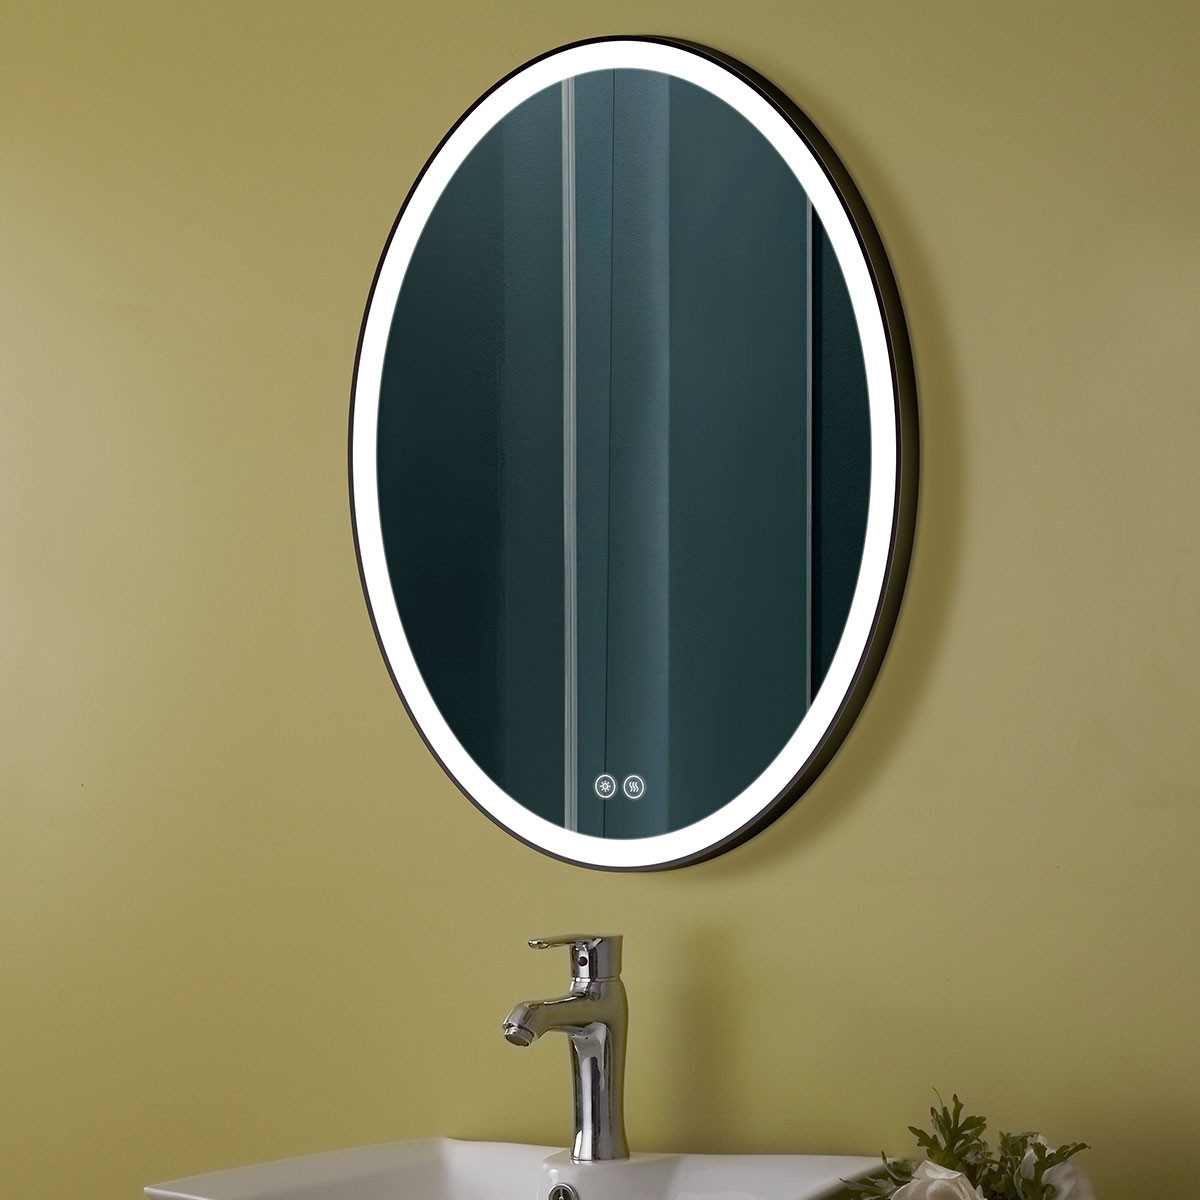 DECORAPORT 24 x 32 Inch LED Bathroom Mirror/Dress Mirror with Touch Button, Anti Fog, Dimmable, Vertical Mount (D1102-2432)